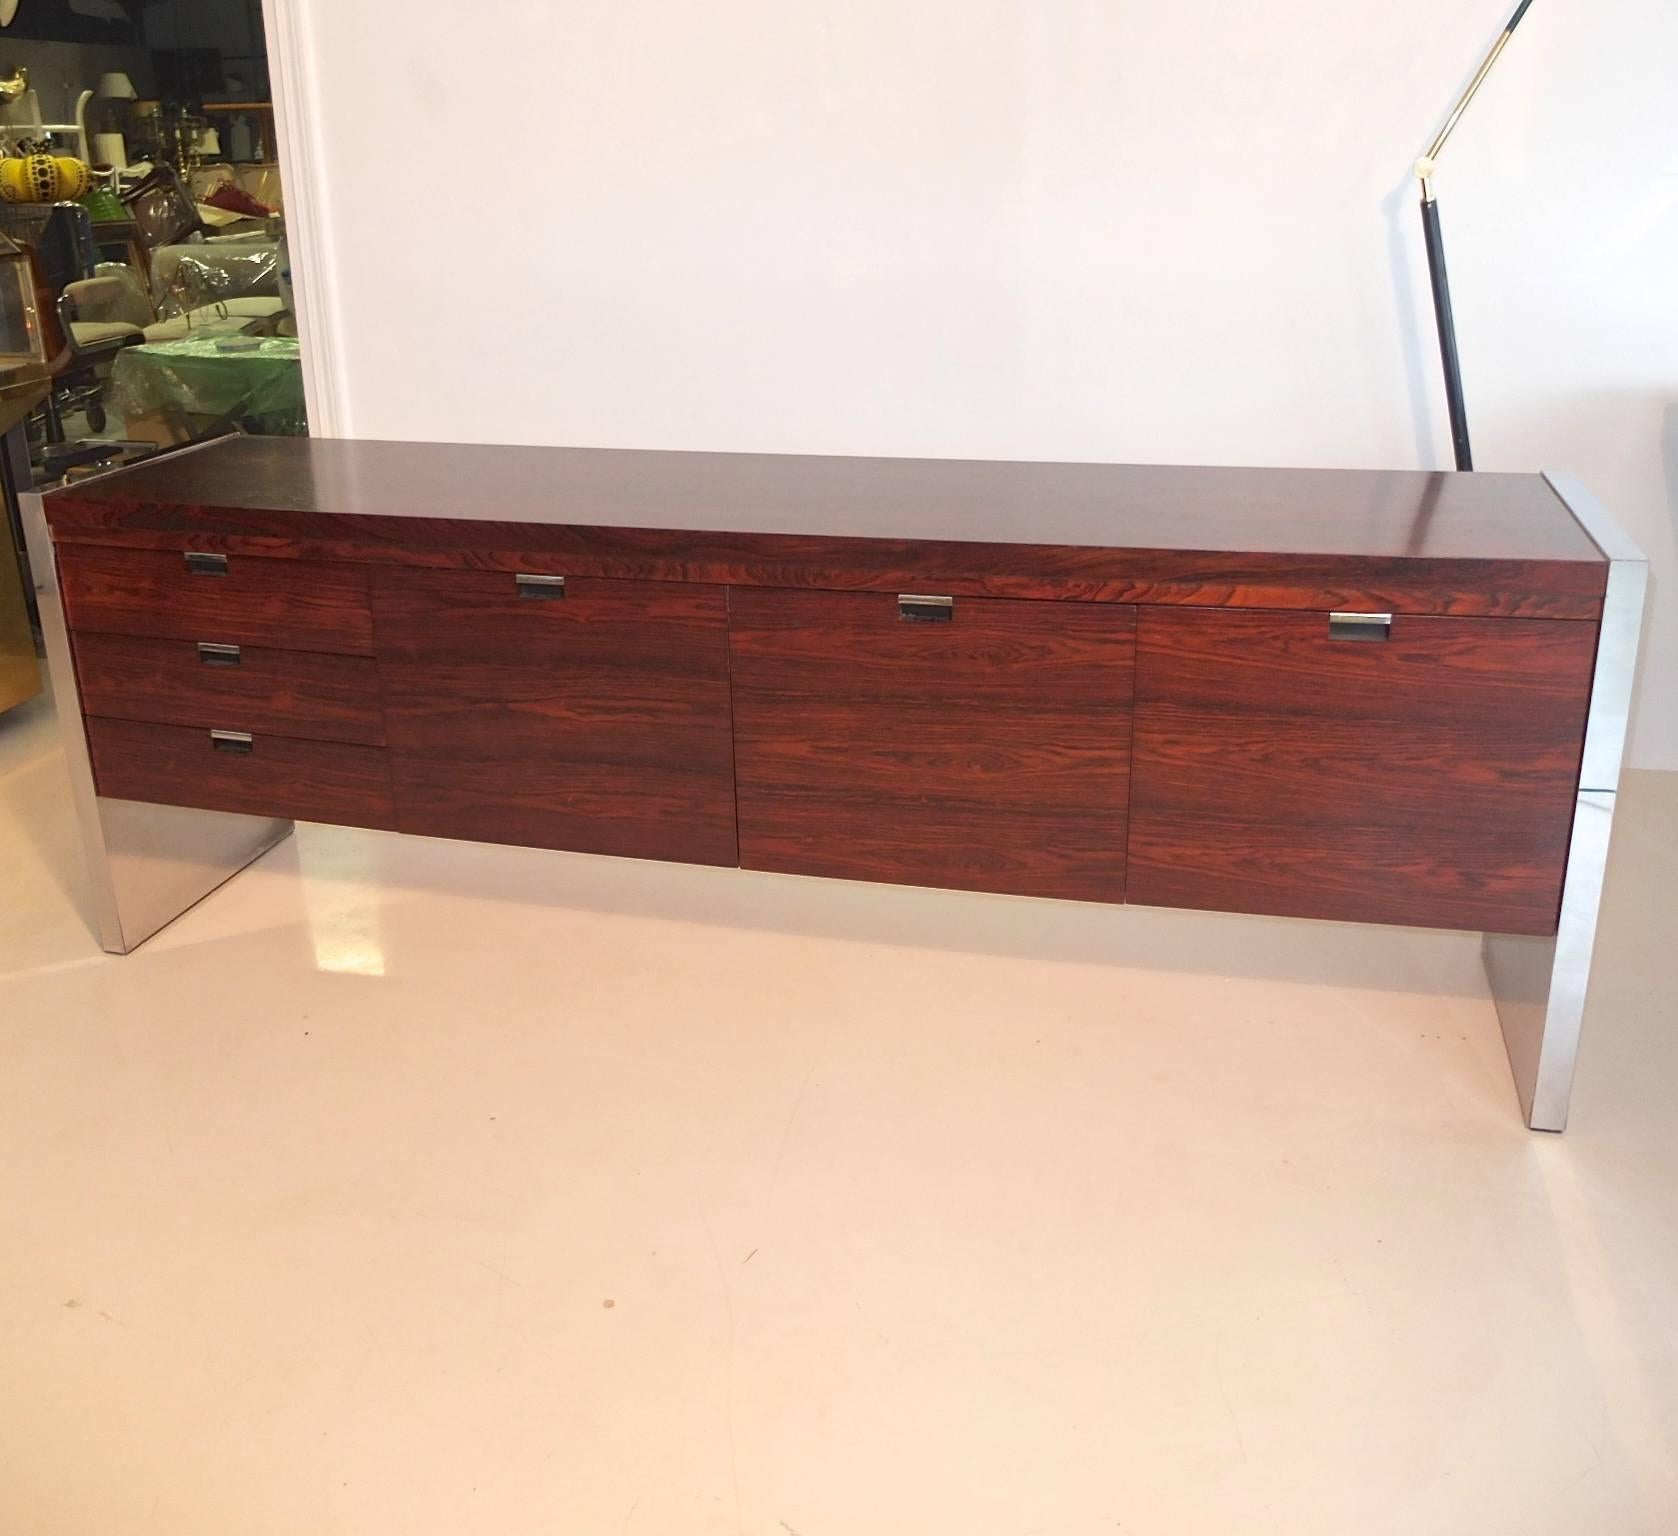 Richly grained rosewood credenza designed by Roger Sprunger for Dunbar for its executive collection. Four sections of drawers: Three smaller drawers and three large drawers for file folders (at last, something chic in which to hide all your papers